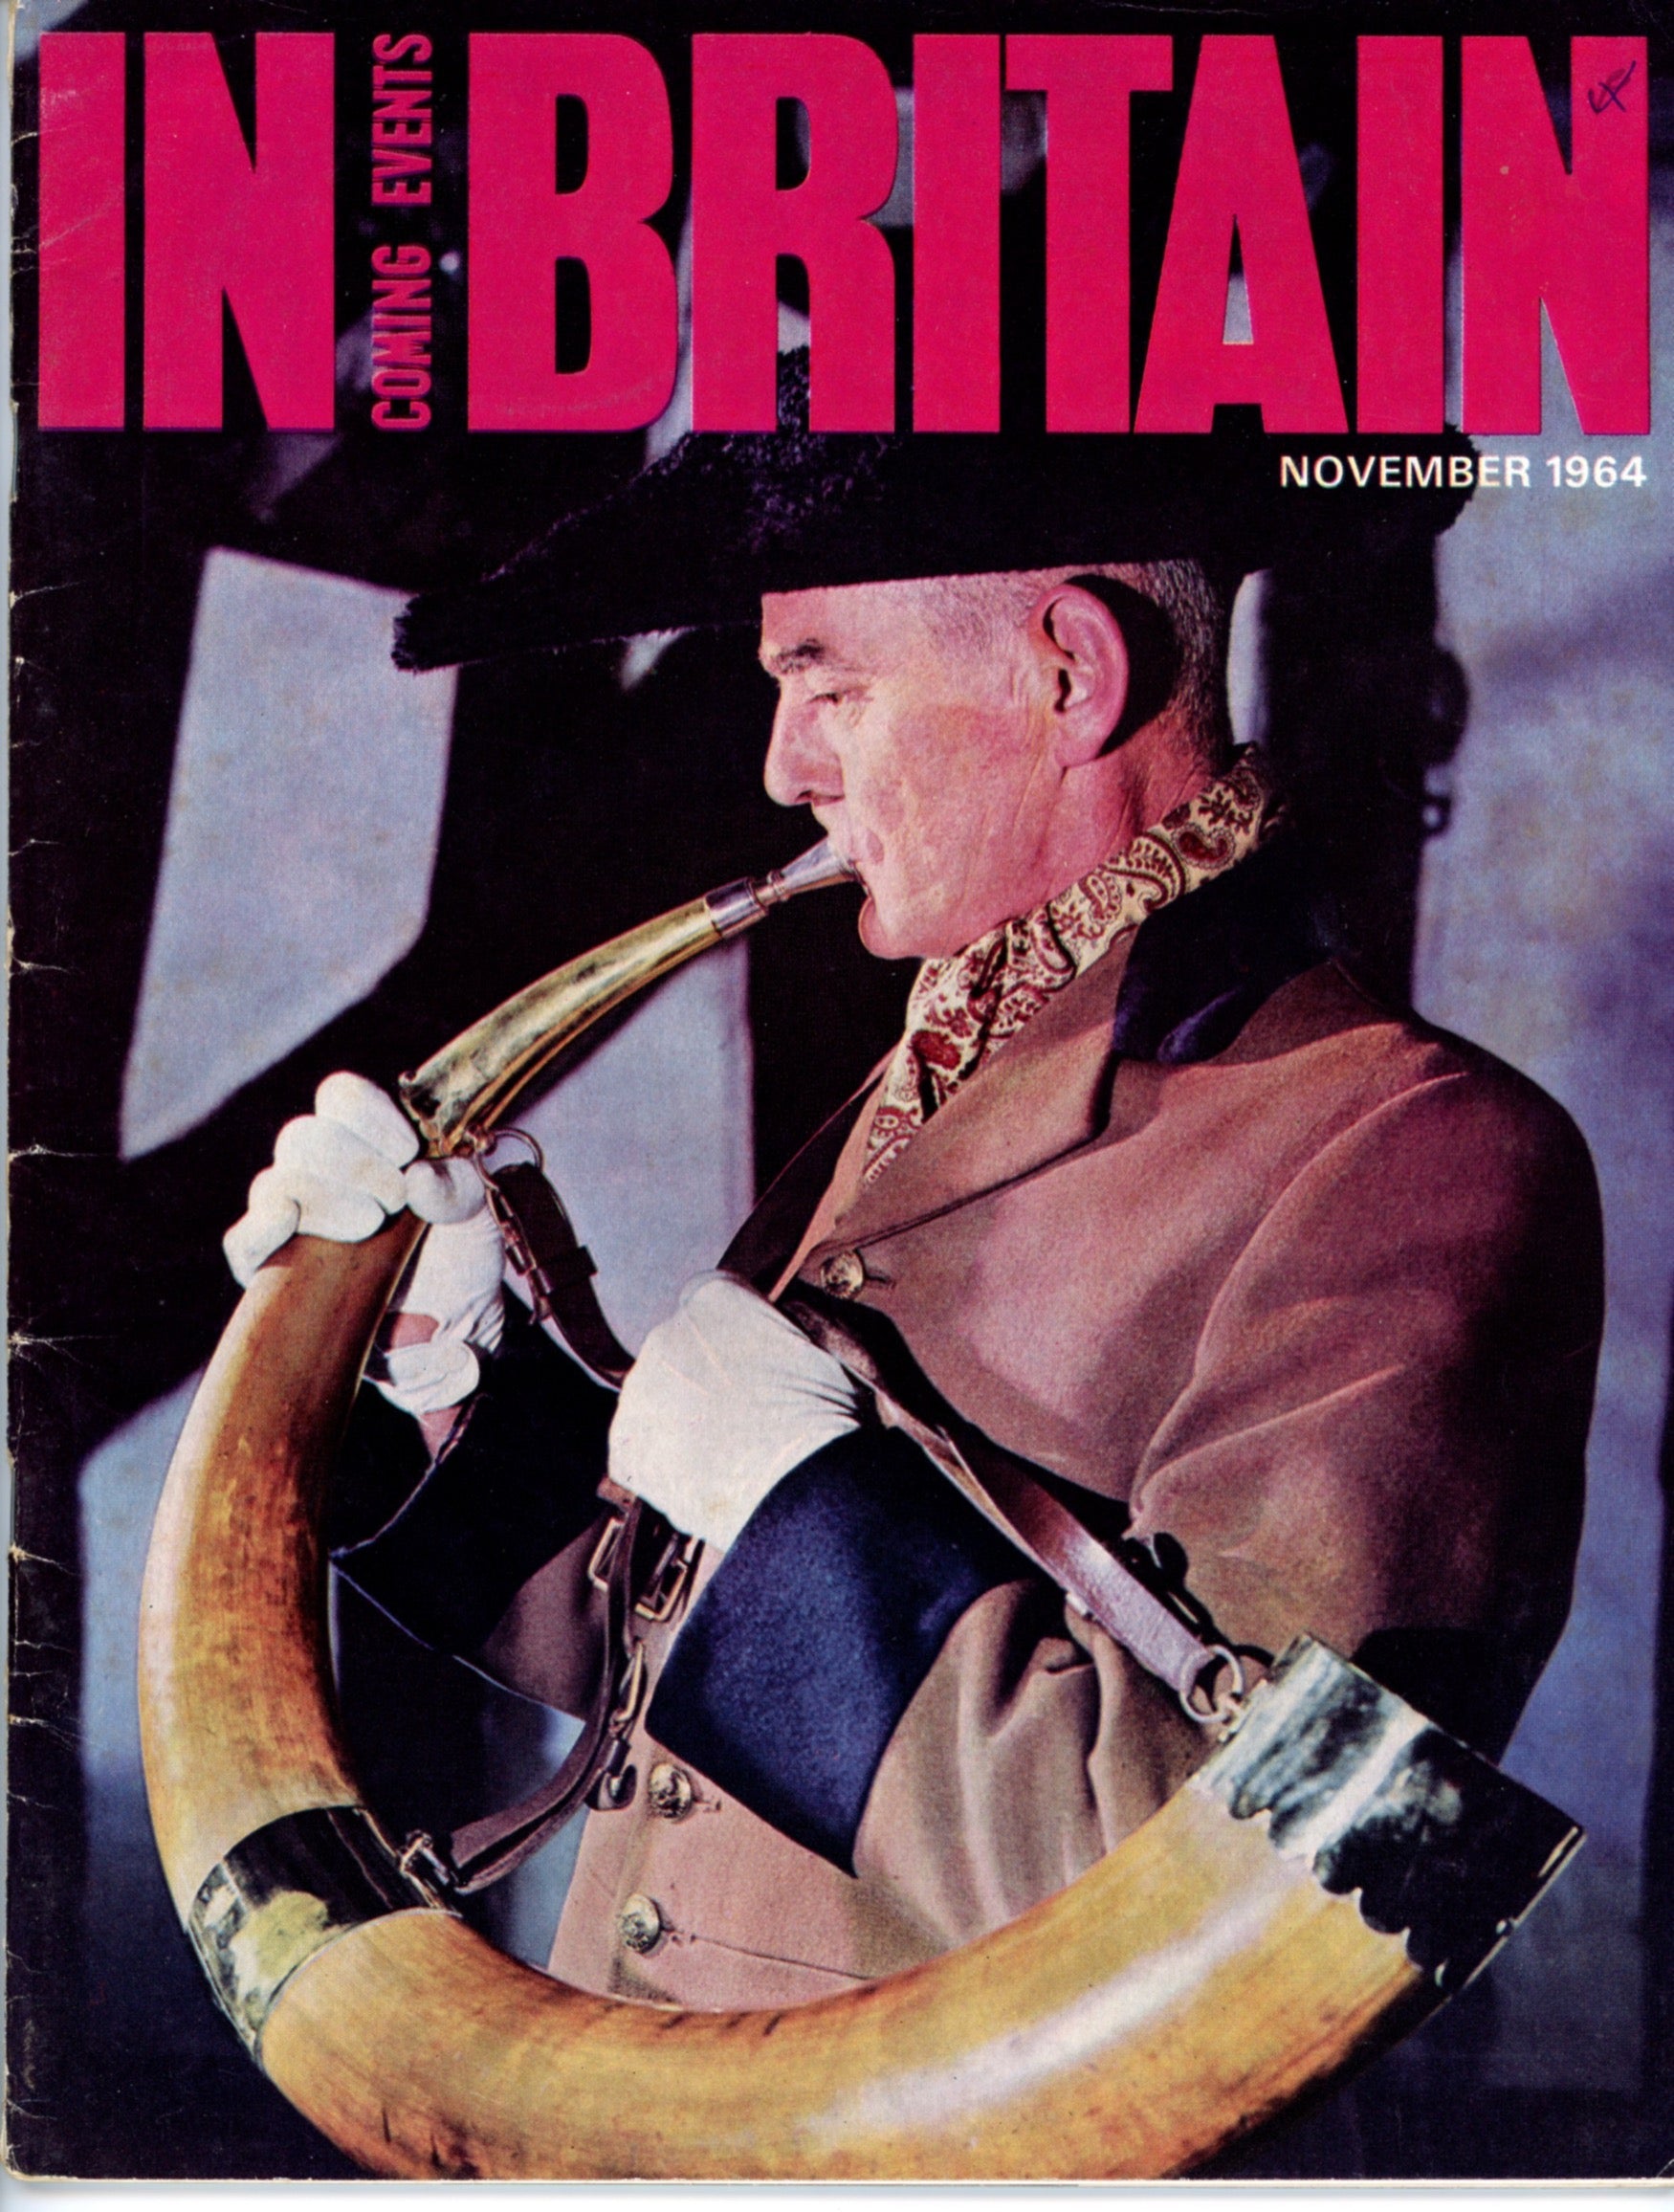 COMING EVENTS IN BRITAIN Vintage Travel Magazines Single Issues © November 1964